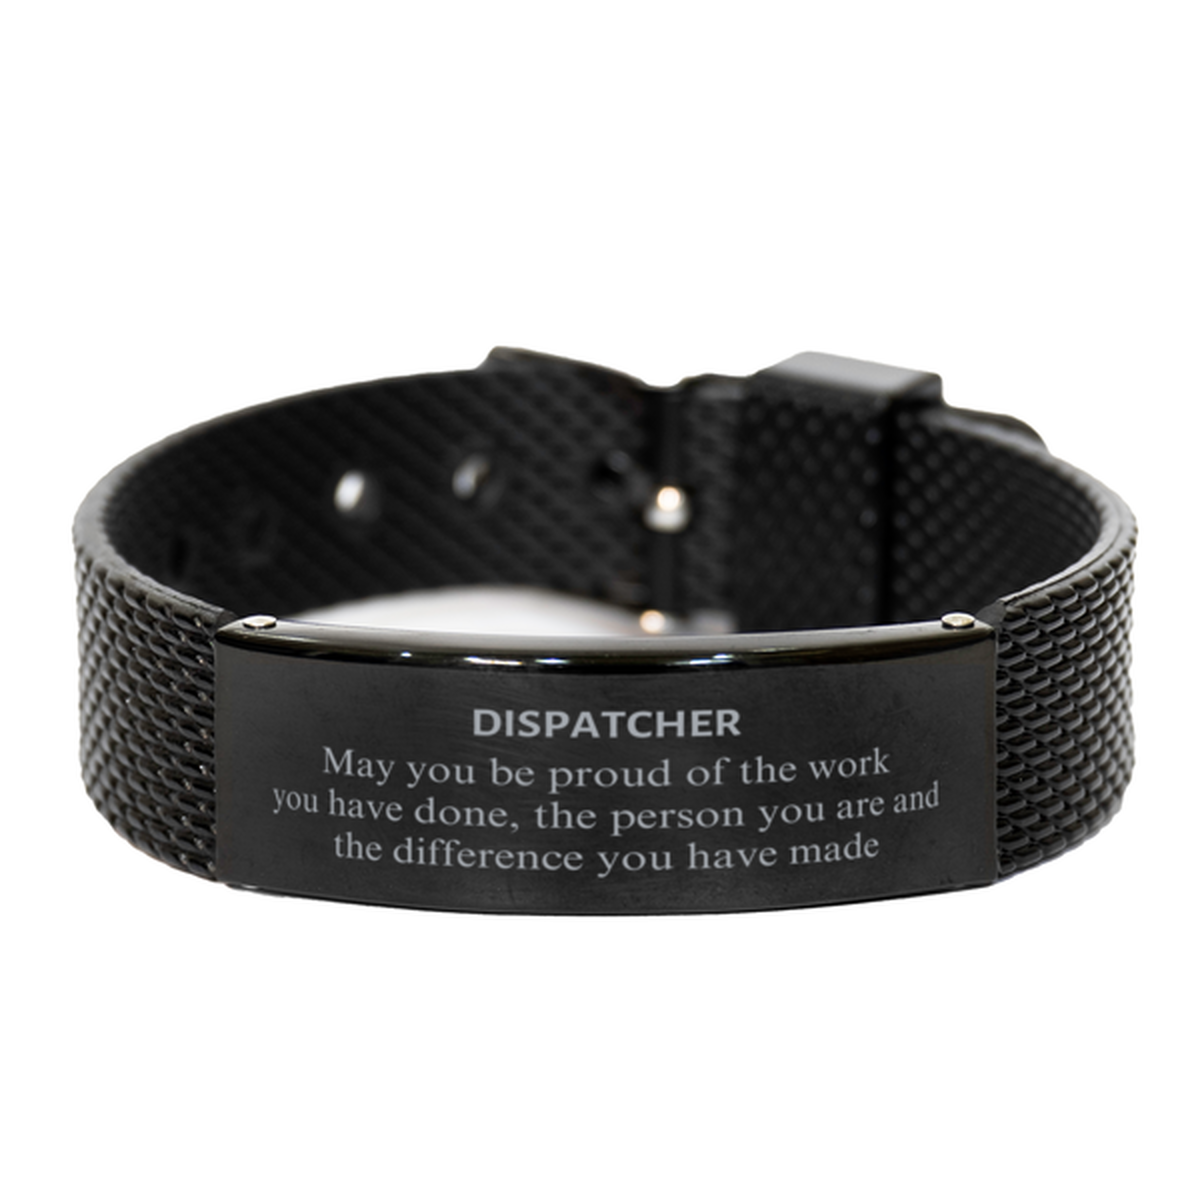 Dispatcher May you be proud of the work you have done, Retirement Dispatcher Black Shark Mesh Bracelet for Colleague Appreciation Gifts Amazing for Dispatcher